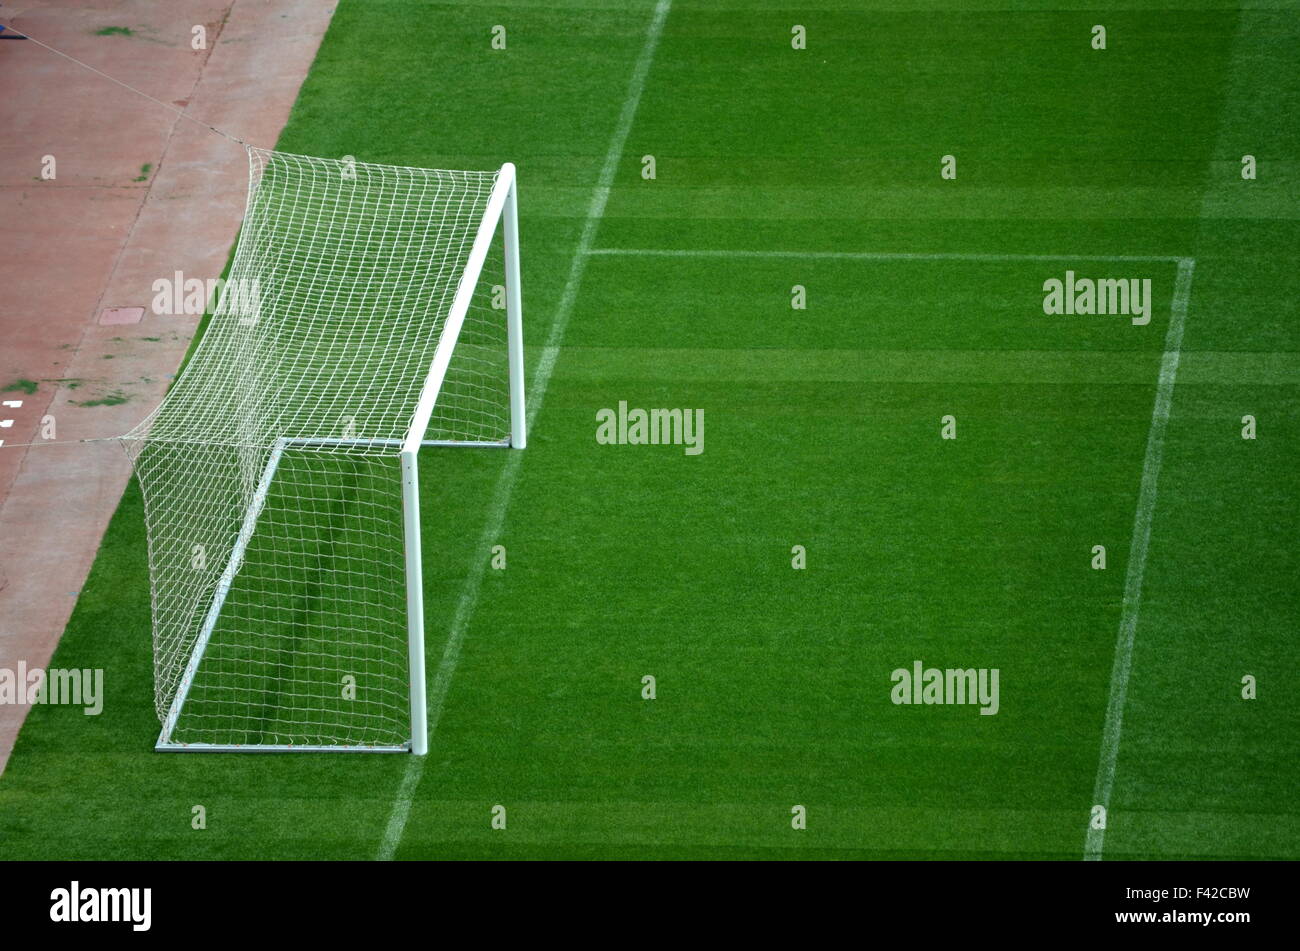 Goal And Soccer Field During Soccer Game Stock Photo Alamy